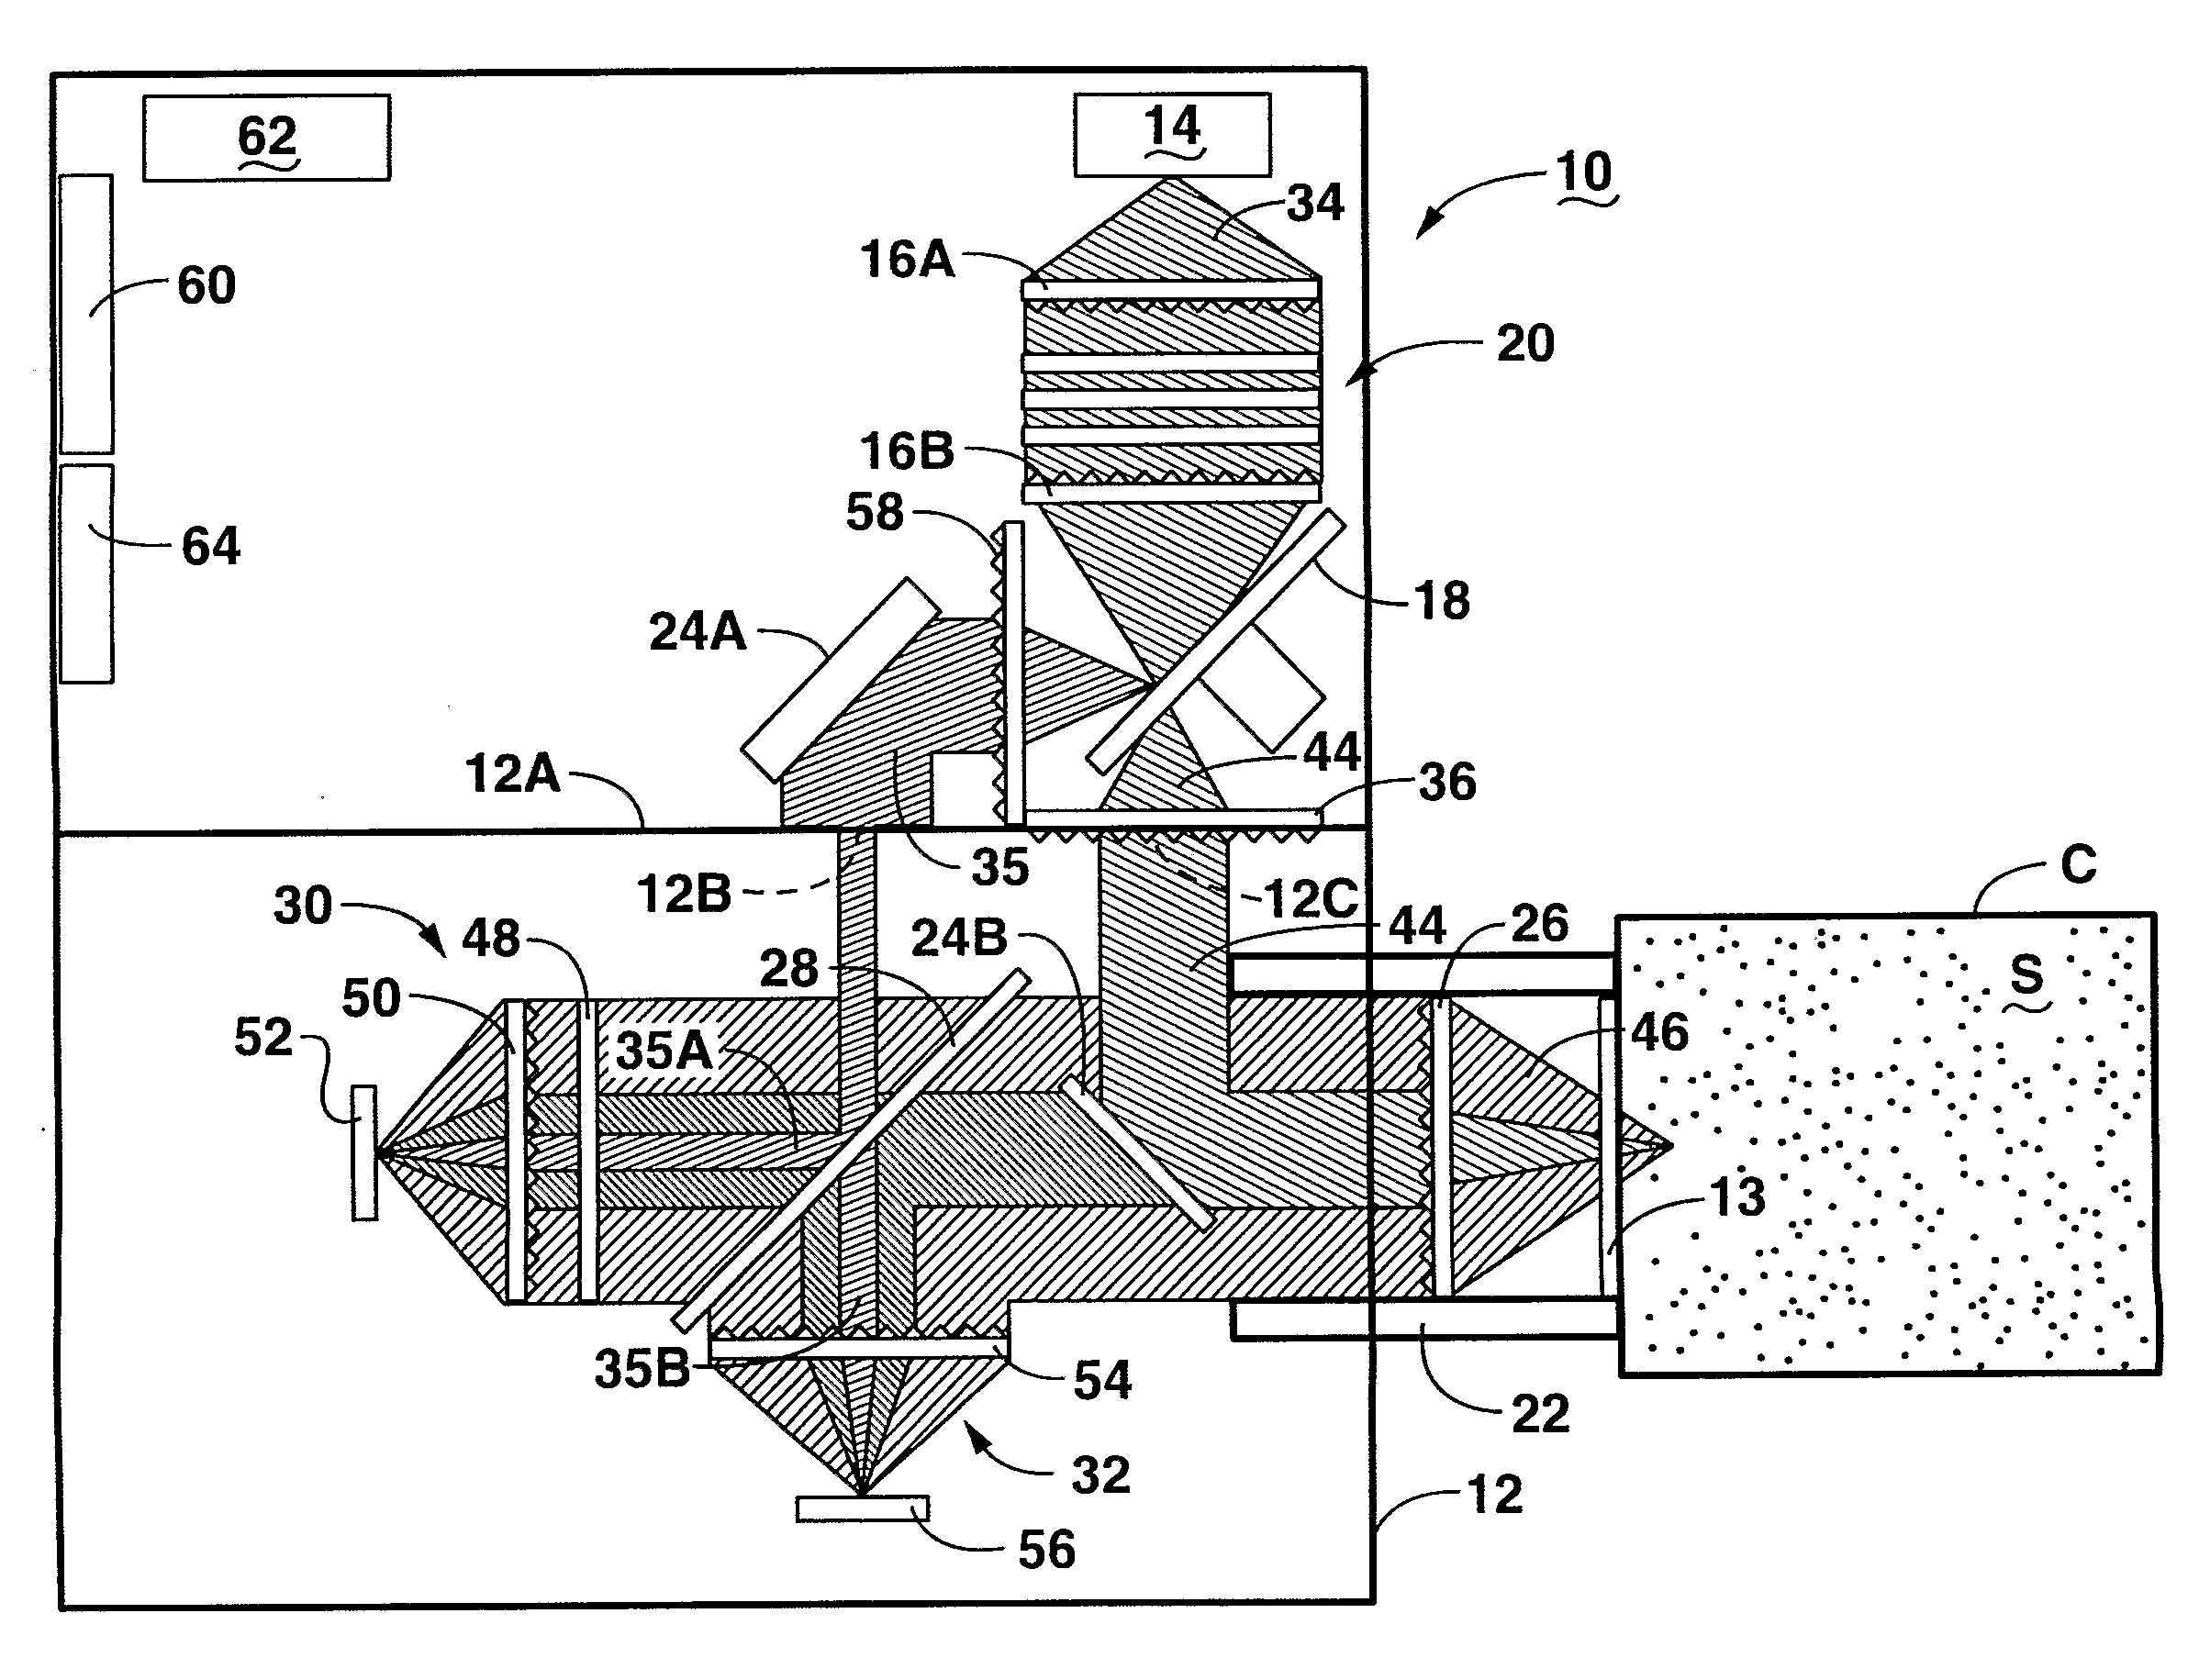 Optical analysis system and elements to isolate spectral region